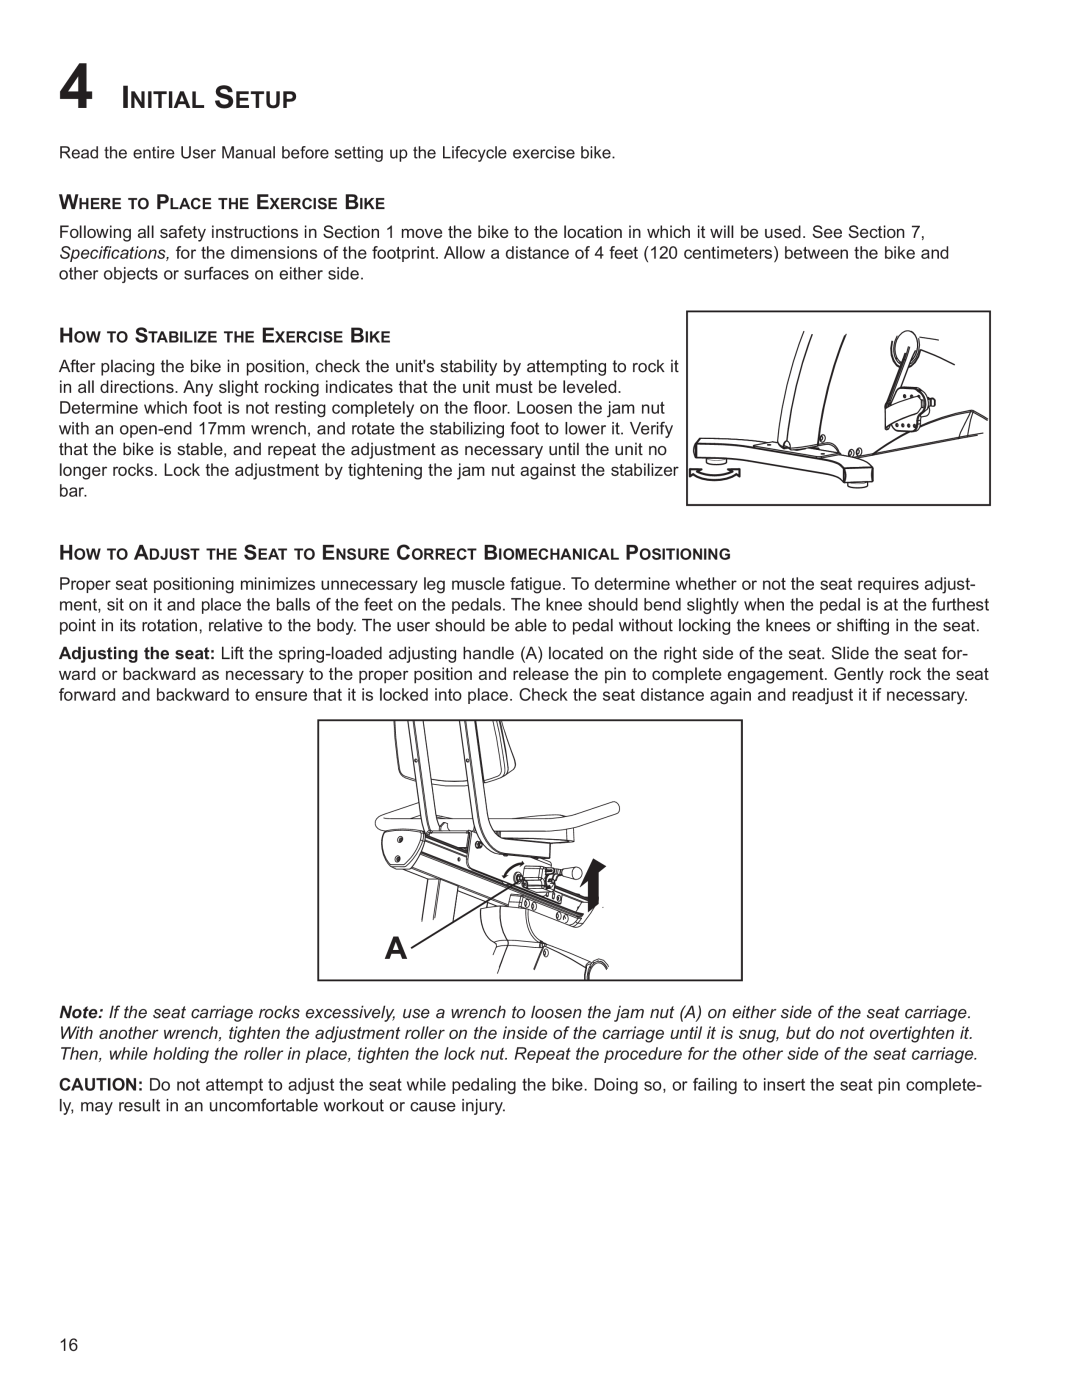 Life Fitness R3 owner manual Initial Setup, Where To Place The Exercise Bike, How To Stabilize The Exercise Bike 